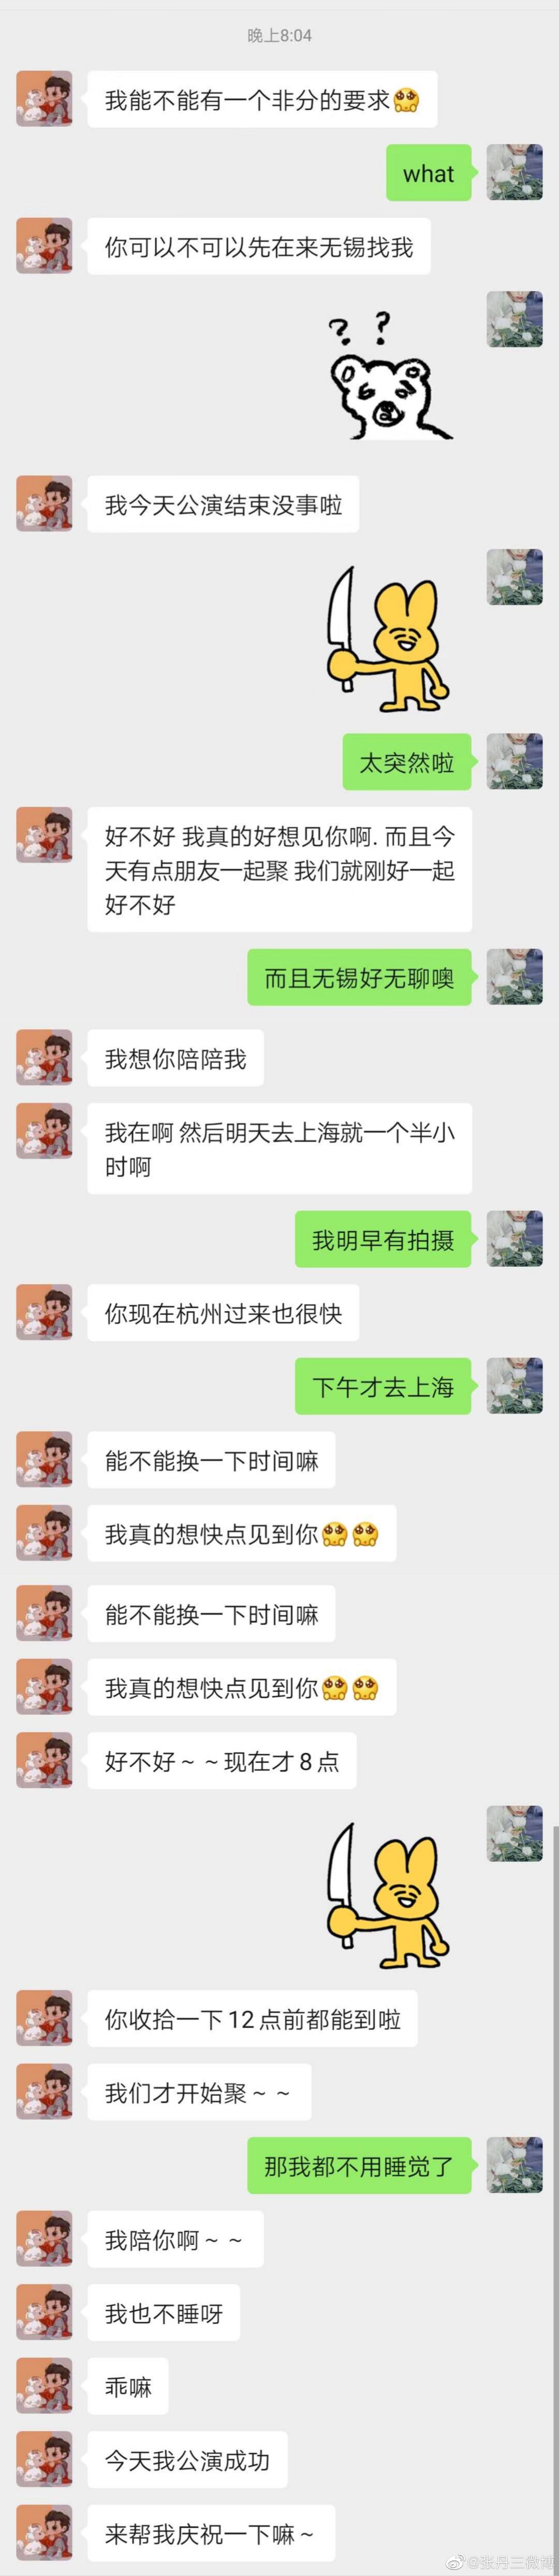 38jiejie  三八姐姐｜Former SNH48 Member, Zhang Dansan, Reveals Screenshots with Kris  Wu Allegedly Telling Her He Likes His Girls “Clean” and “Well-Behaved”,  More Girls Come Forward with Their Experiences